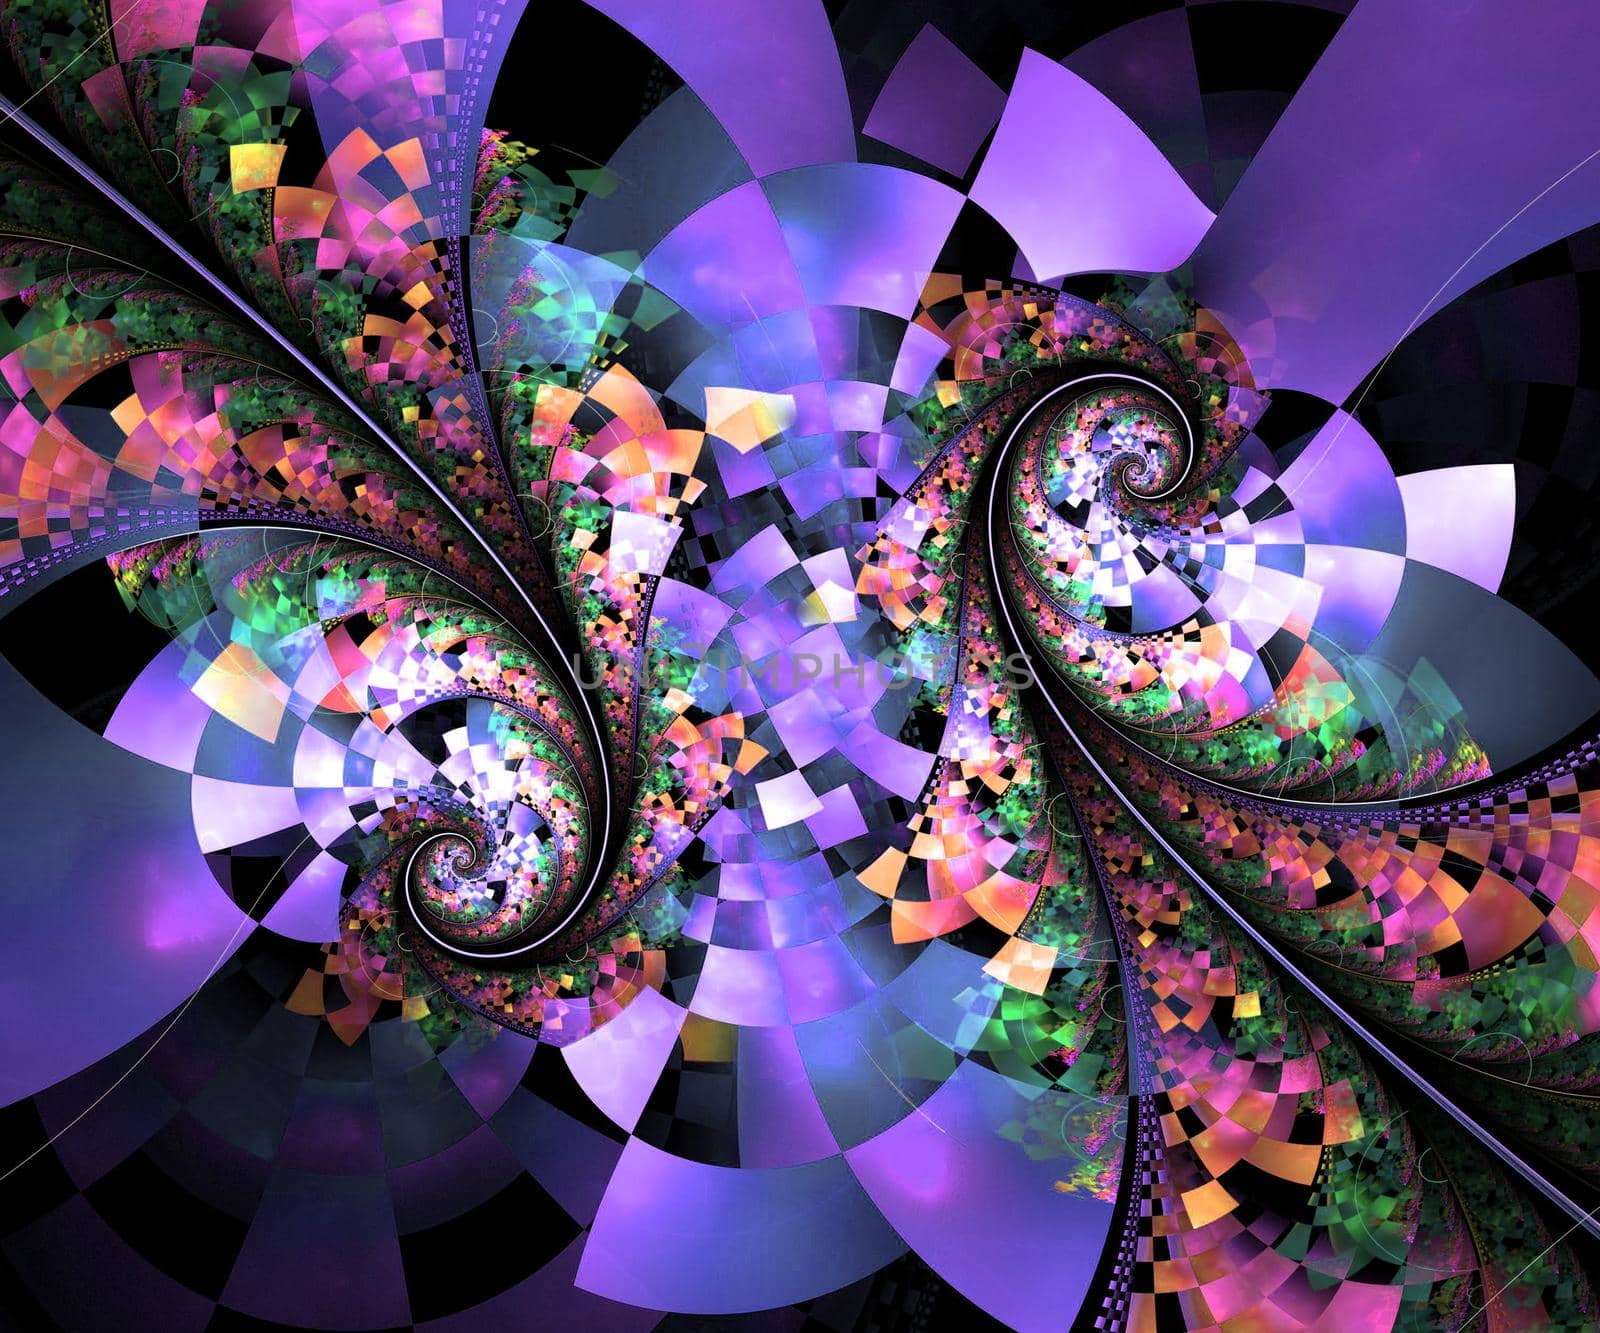 Computer generated colorful fractal artwork by stocklady